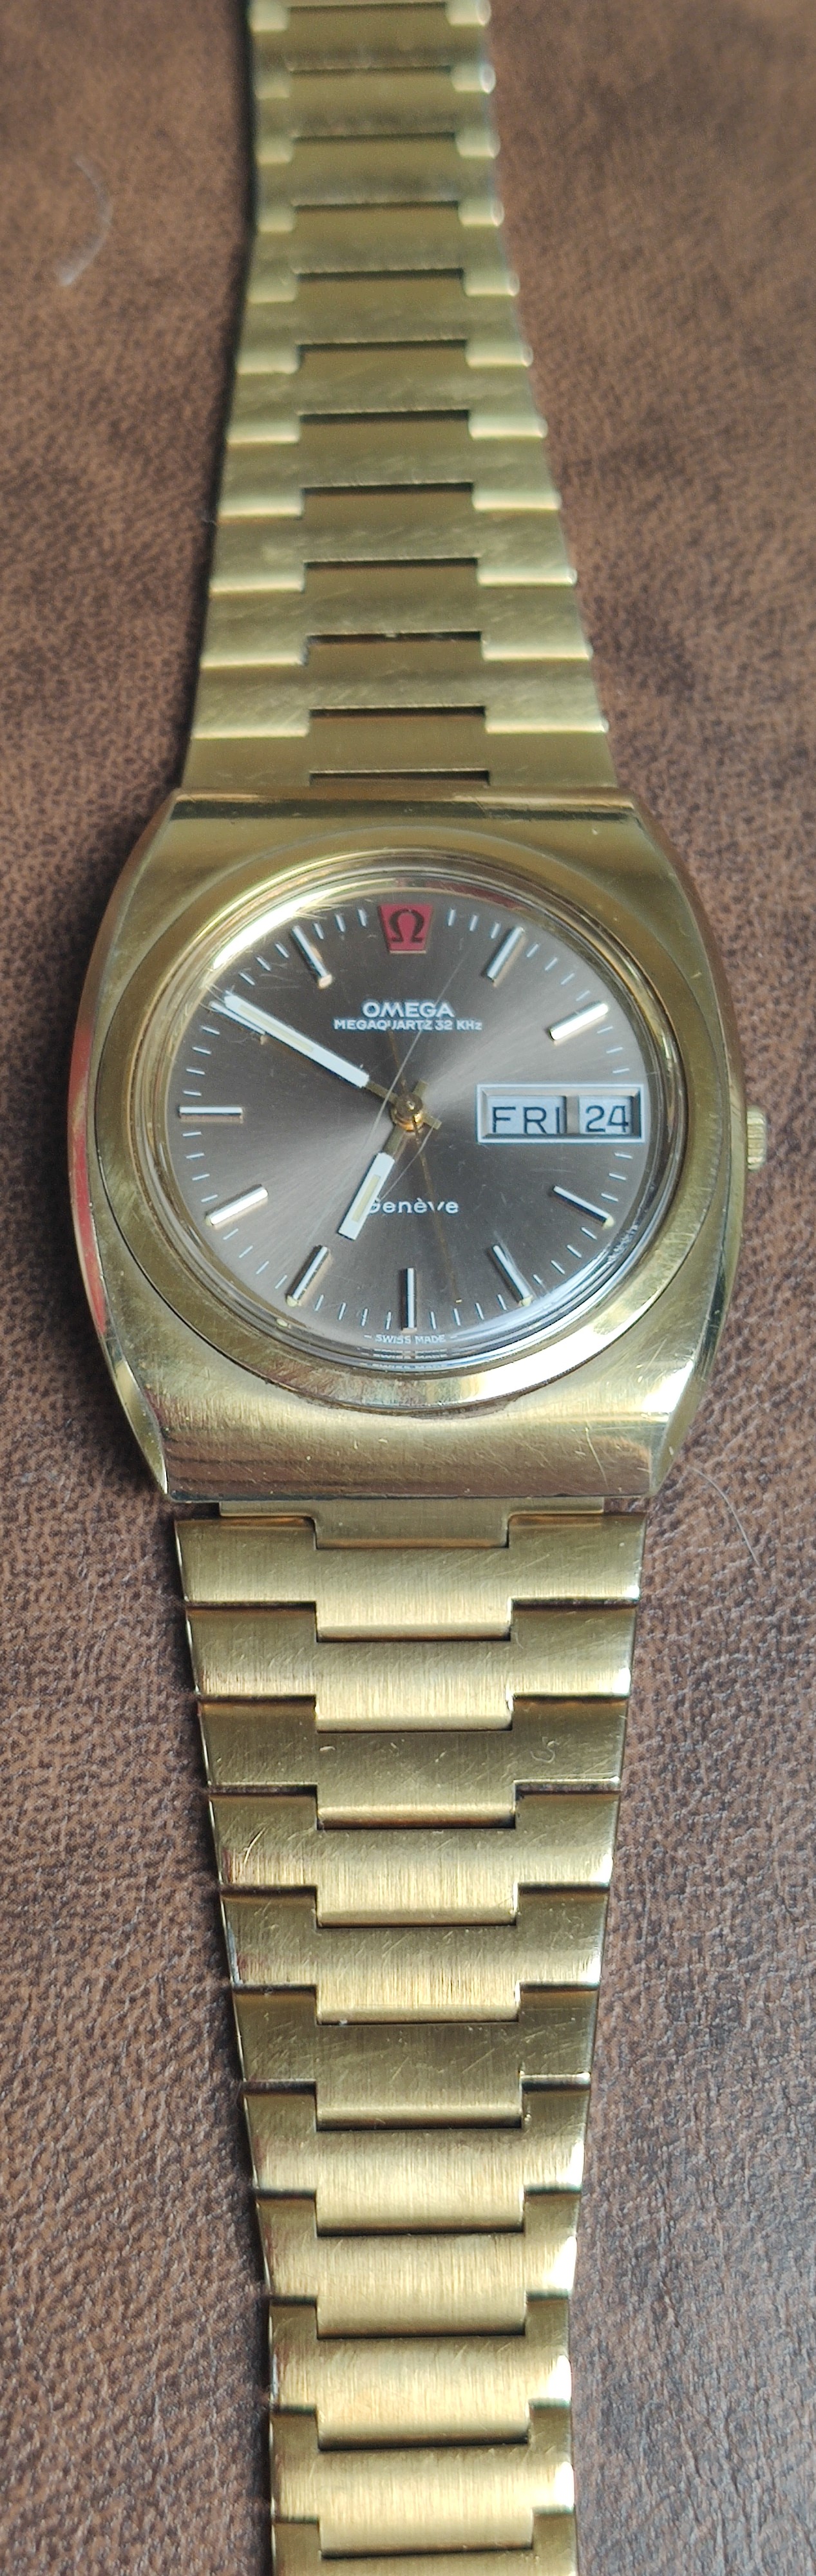 Omega Megaquartz 32 Gentlemans Watch Circa 1974 With Very Rare Gold plated Omega Strap. - Image 3 of 8